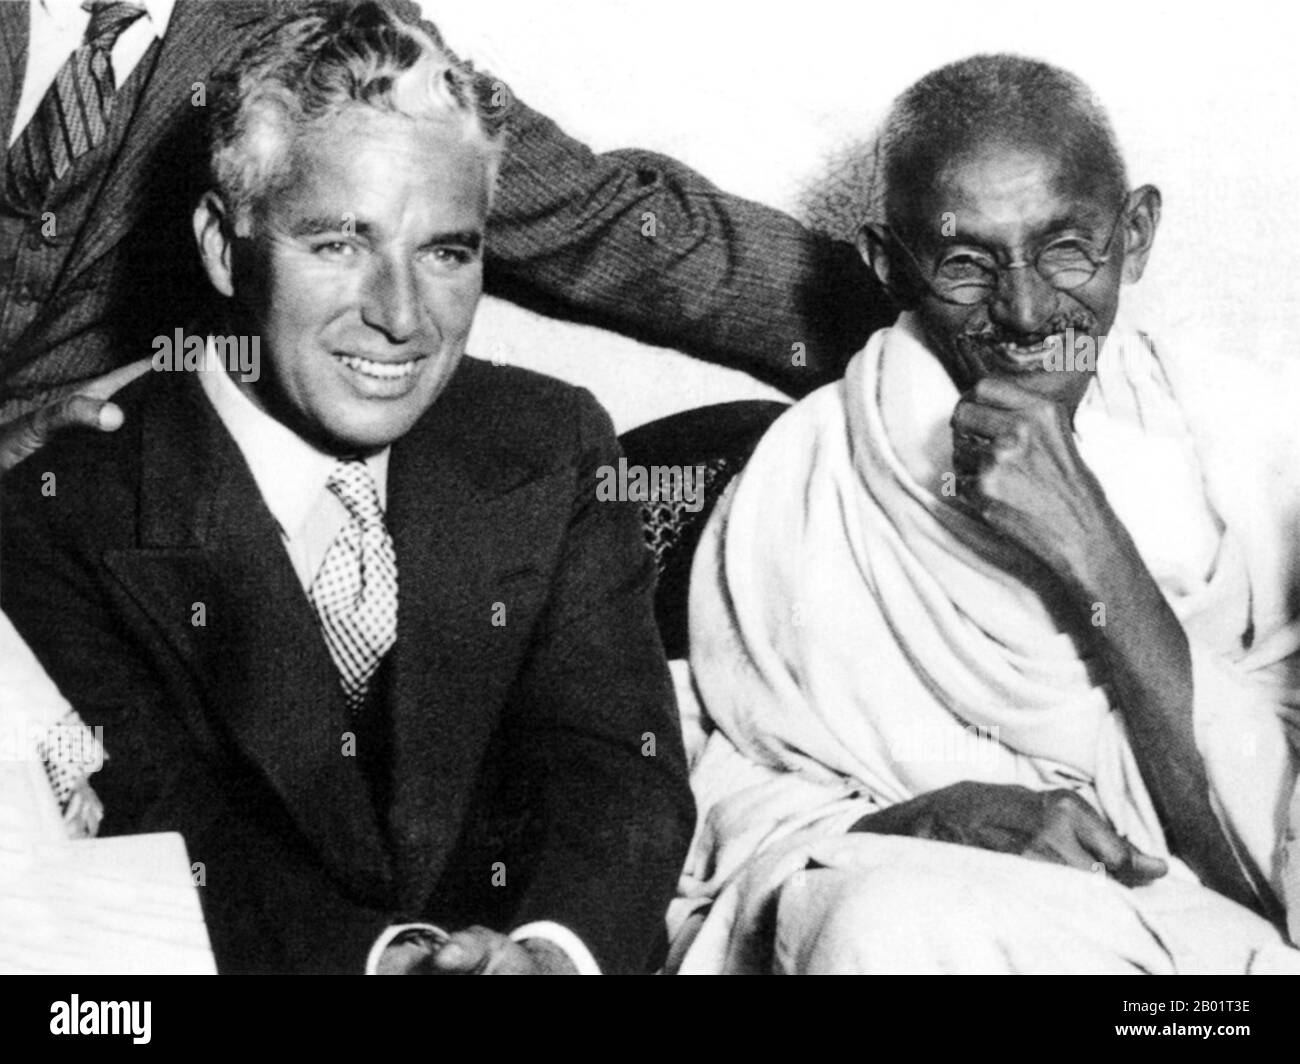 India/UK: Mahatma Gandhi (2 October 1869 - 30 January 1948), preeminent political and ideological leader of India's independence movement, with Charlie Chaplin in London, 1931.  Mohandas Karamchand Gandhi was the preeminent political and ideological leader of India during the Indian independence movement. He pioneered satyagraha. This is defined as resistance to tyranny through mass civil disobedience, a philosophy firmly founded upon ahimsa, or total non-violence. This concept helped India gain independence and inspired movements for civil rights and freedom across the world. Stock Photo